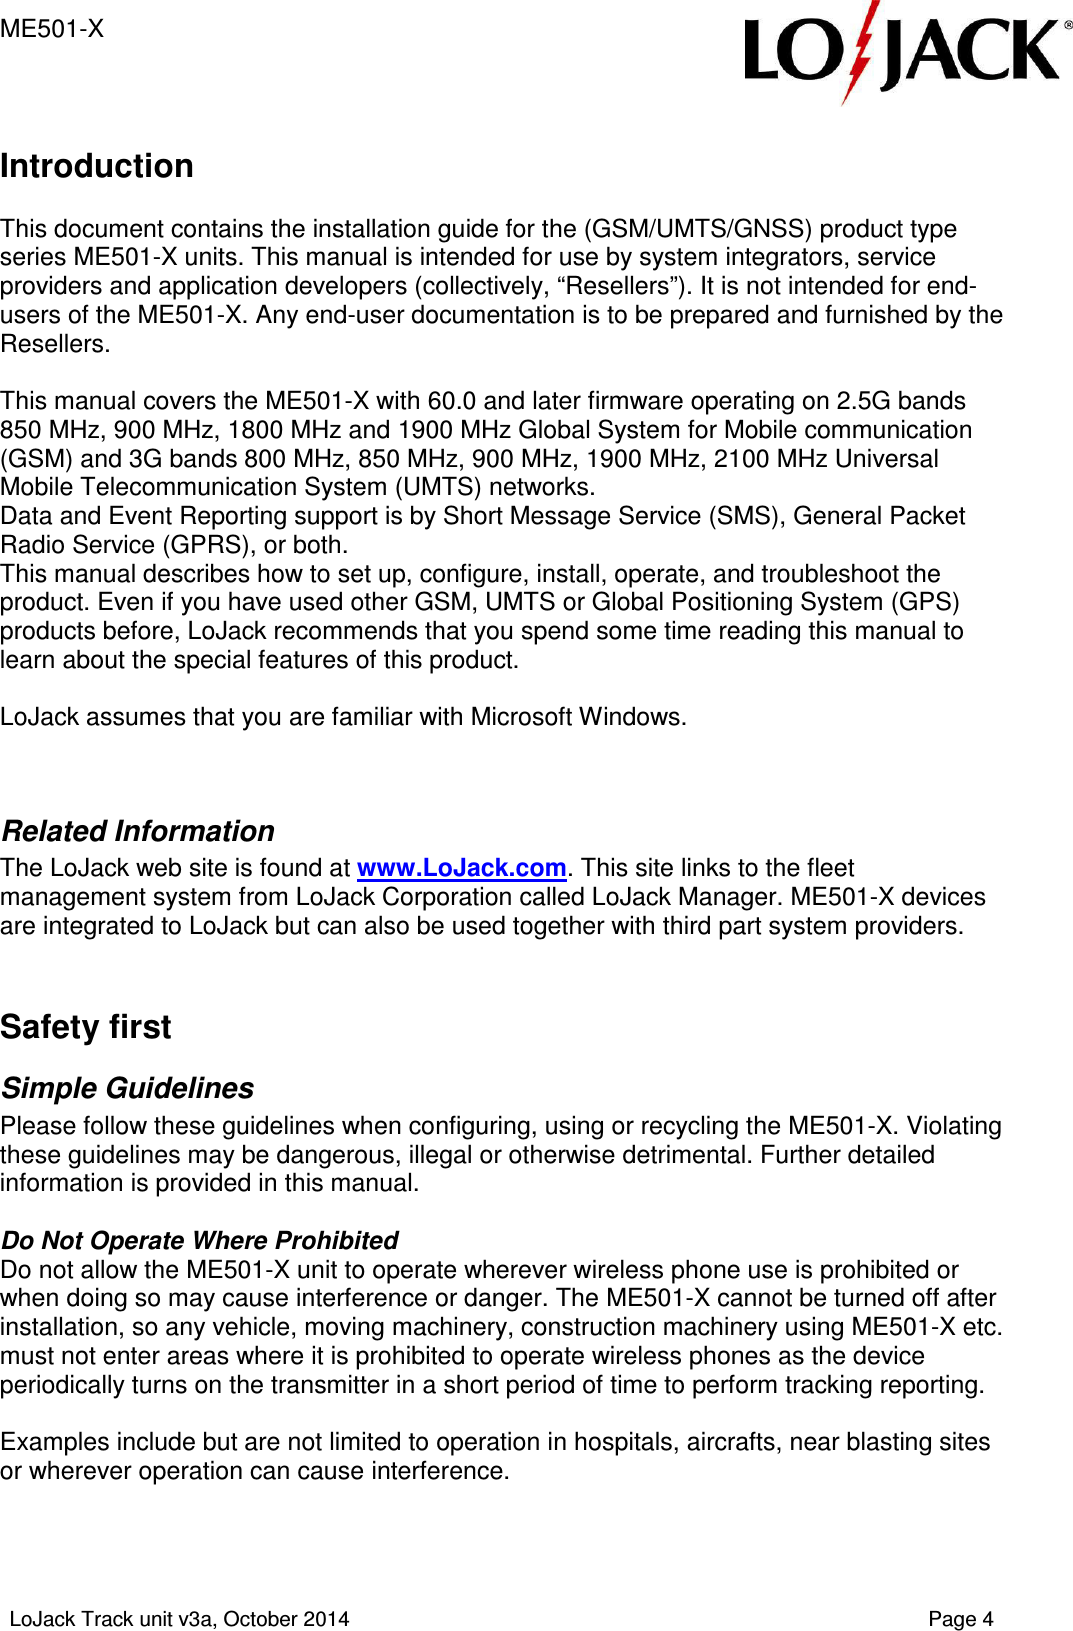 ME501-X   LoJack Track unit v3a, October 2014    Page 4  Introduction  This document contains the installation guide for the (GSM/UMTS/GNSS) product type series ME501-X units. This manual is intended for use by system integrators, service providers and application developers (collectively, “Resellers”). It is not intended for end-users of the ME501-X. Any end-user documentation is to be prepared and furnished by the Resellers.  This manual covers the ME501-X with 60.0 and later firmware operating on 2.5G bands 850 MHz, 900 MHz, 1800 MHz and 1900 MHz Global System for Mobile communication (GSM) and 3G bands 800 MHz, 850 MHz, 900 MHz, 1900 MHz, 2100 MHz Universal Mobile Telecommunication System (UMTS) networks.  Data and Event Reporting support is by Short Message Service (SMS), General Packet Radio Service (GPRS), or both.  This manual describes how to set up, configure, install, operate, and troubleshoot the product. Even if you have used other GSM, UMTS or Global Positioning System (GPS) products before, LoJack recommends that you spend some time reading this manual to learn about the special features of this product.   LoJack assumes that you are familiar with Microsoft Windows.   Related Information The LoJack web site is found at www.LoJack.com. This site links to the fleet management system from LoJack Corporation called LoJack Manager. ME501-X devices are integrated to LoJack but can also be used together with third part system providers.   Safety first Simple Guidelines Please follow these guidelines when configuring, using or recycling the ME501-X. Violating these guidelines may be dangerous, illegal or otherwise detrimental. Further detailed information is provided in this manual.  Do Not Operate Where Prohibited Do not allow the ME501-X unit to operate wherever wireless phone use is prohibited or when doing so may cause interference or danger. The ME501-X cannot be turned off after installation, so any vehicle, moving machinery, construction machinery using ME501-X etc. must not enter areas where it is prohibited to operate wireless phones as the device periodically turns on the transmitter in a short period of time to perform tracking reporting.  Examples include but are not limited to operation in hospitals, aircrafts, near blasting sites or wherever operation can cause interference.    